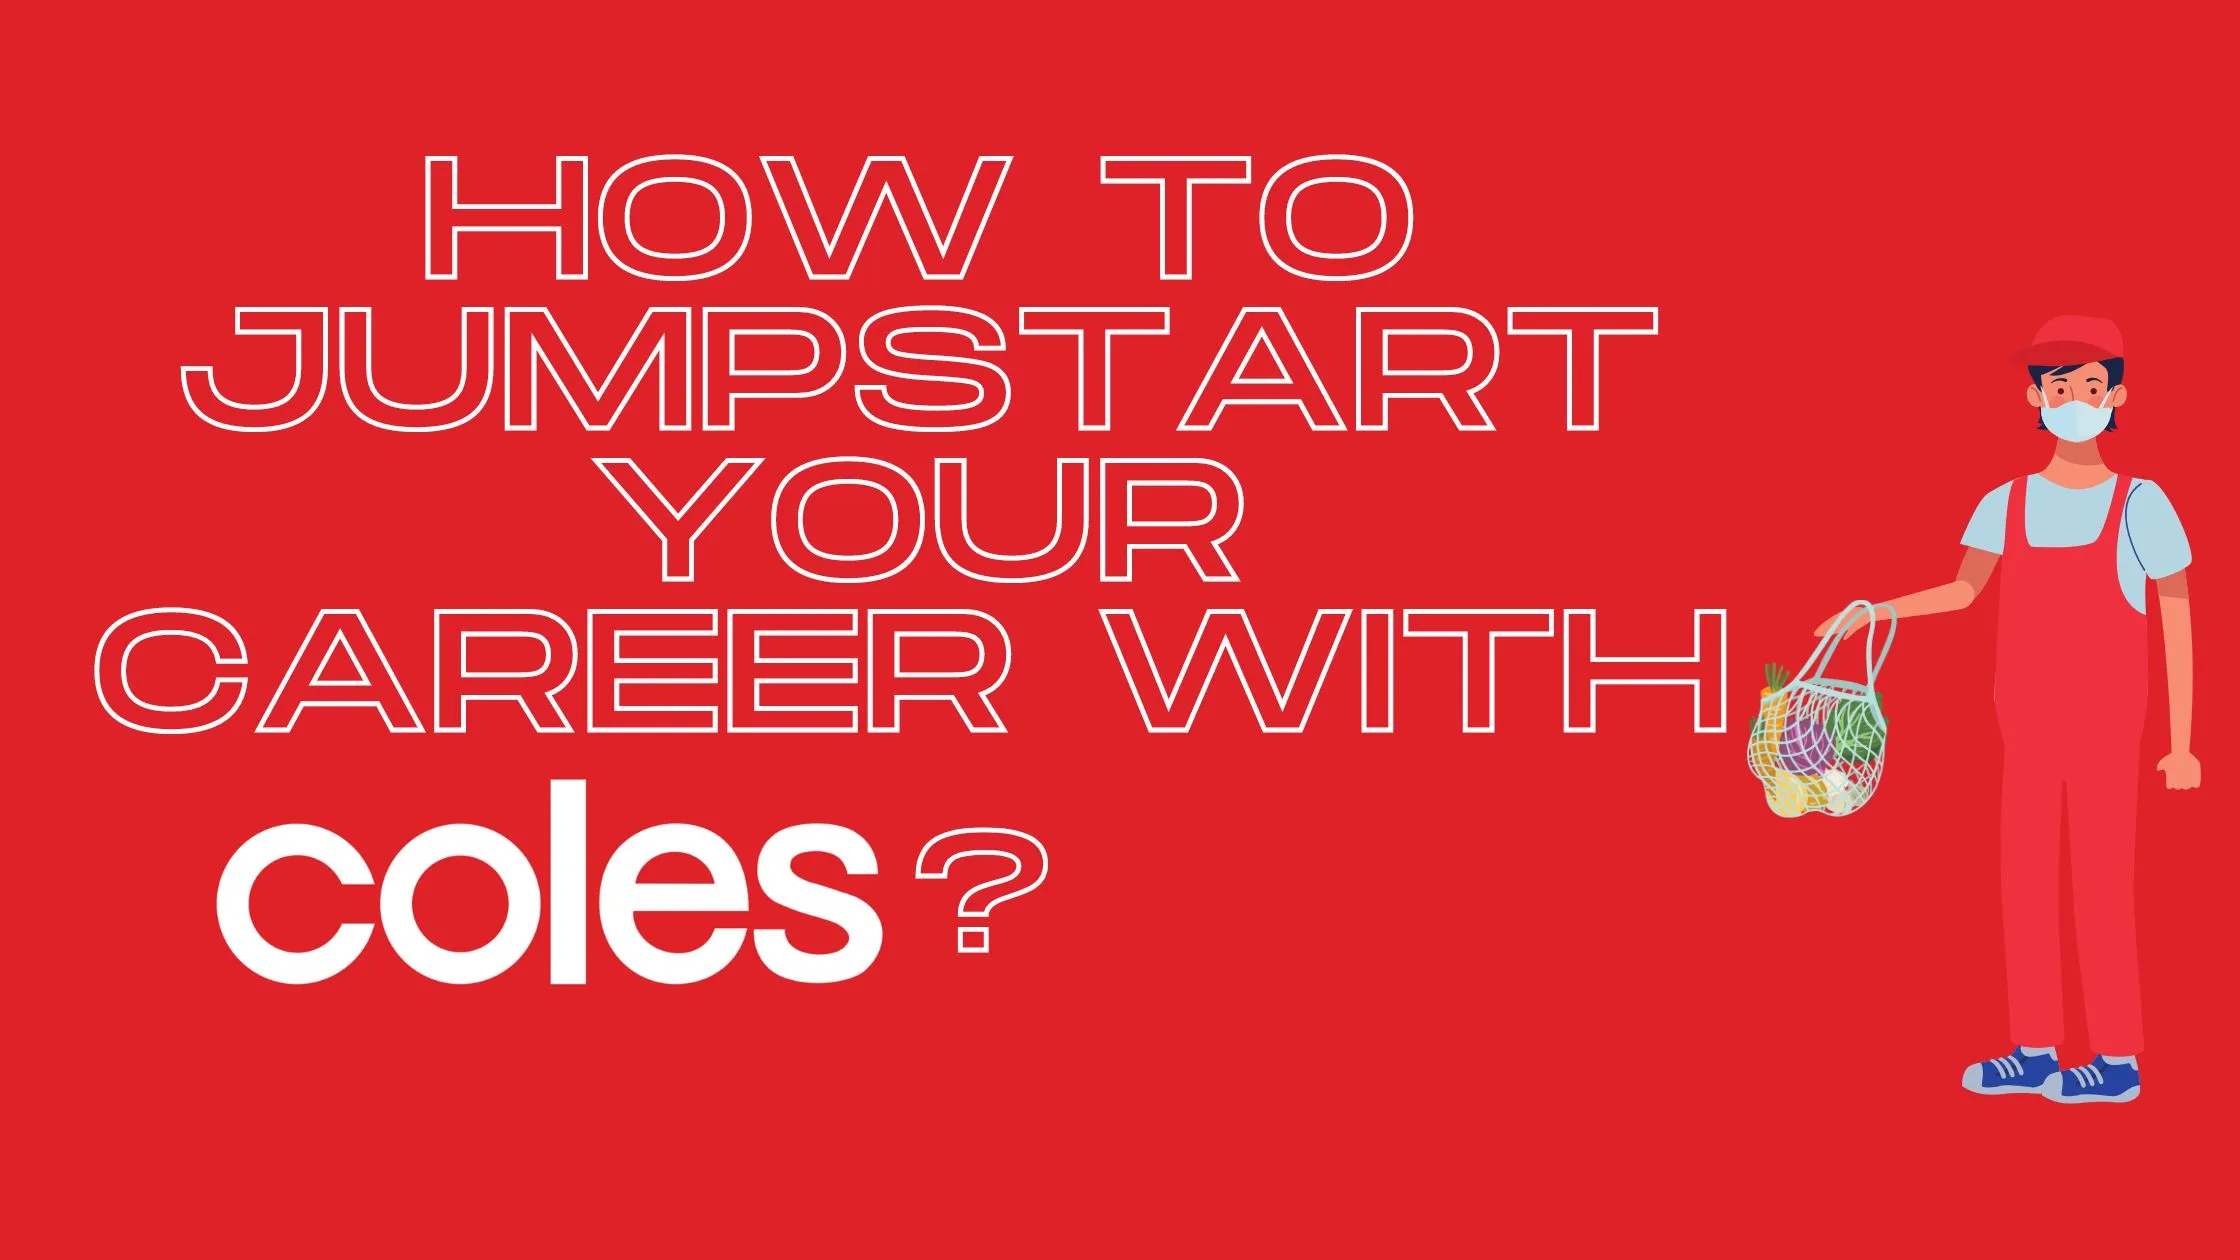 Coles careers and how to jumpstart start yours 